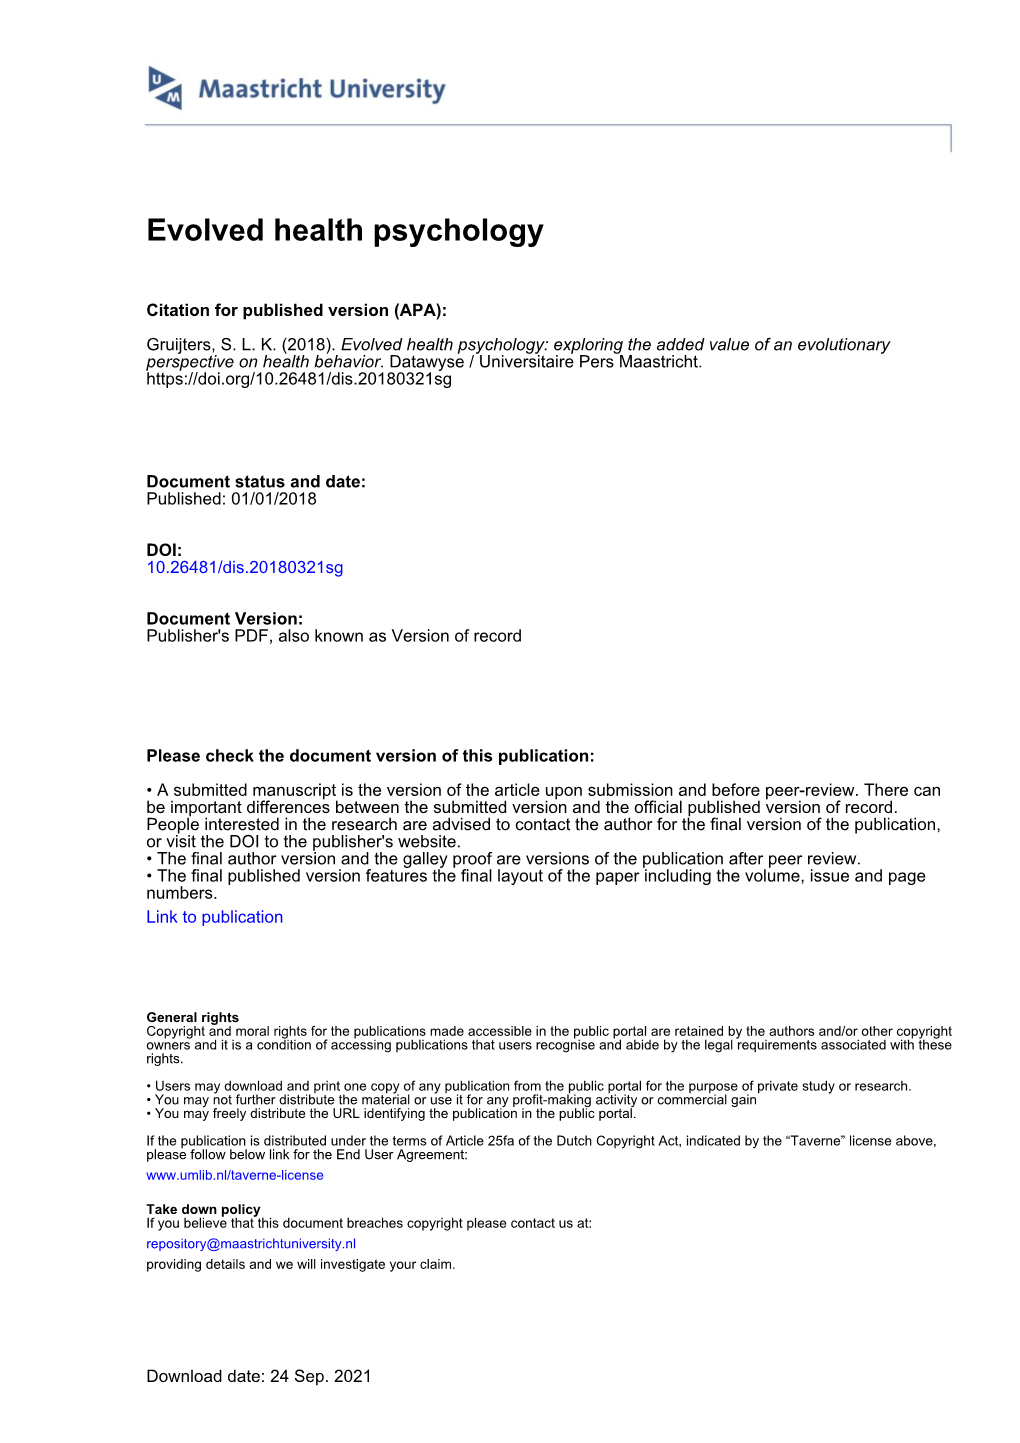 Evolved Health Psychology: Exploring the Added Value of an Evolutionary Perspective on Health Behavior